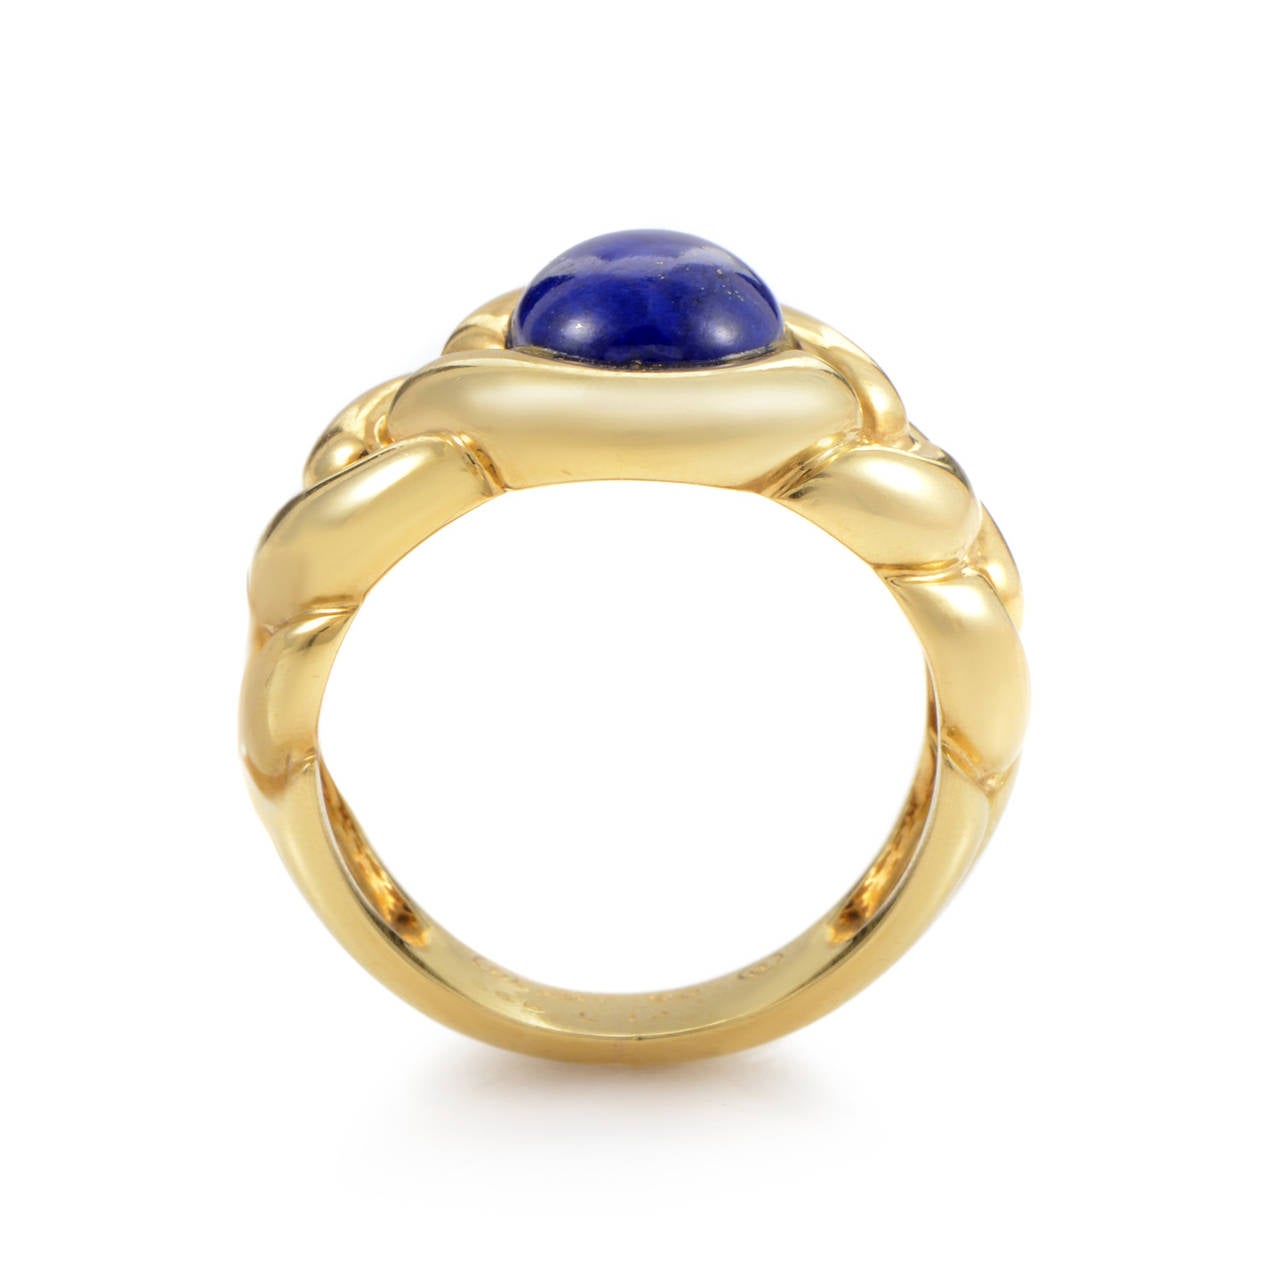 This gorgeous ring from Van Cleef & Arpels shines with an exceptional beauty and elegance. The ring is made of 18K yellow gold and boasts an elusive lapis cabochon main stone.
Ring Size: 6.25 (52 1/8)